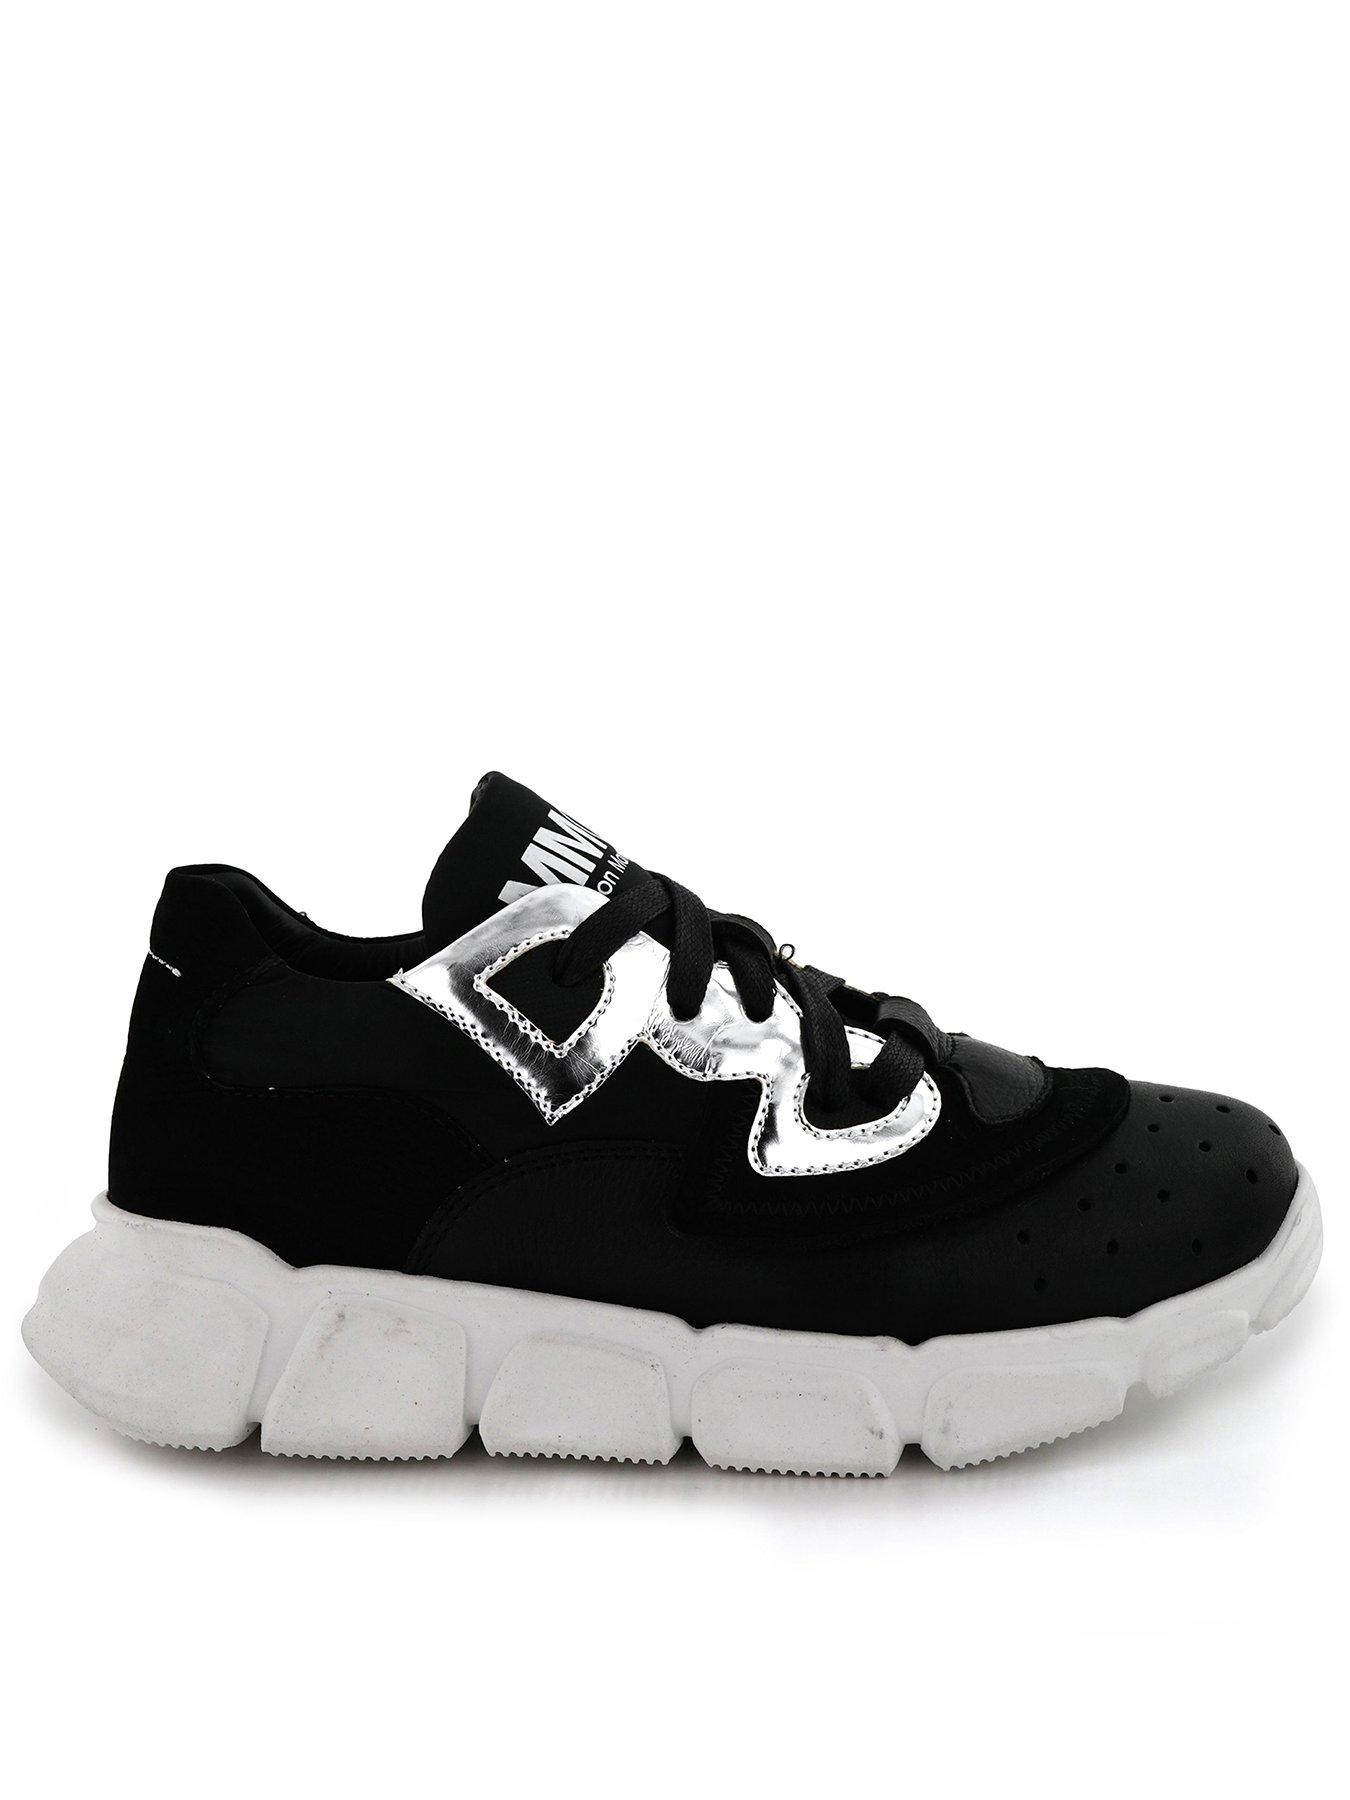 Shoes & boots Kids Chunky Lace Up Trainers - Black